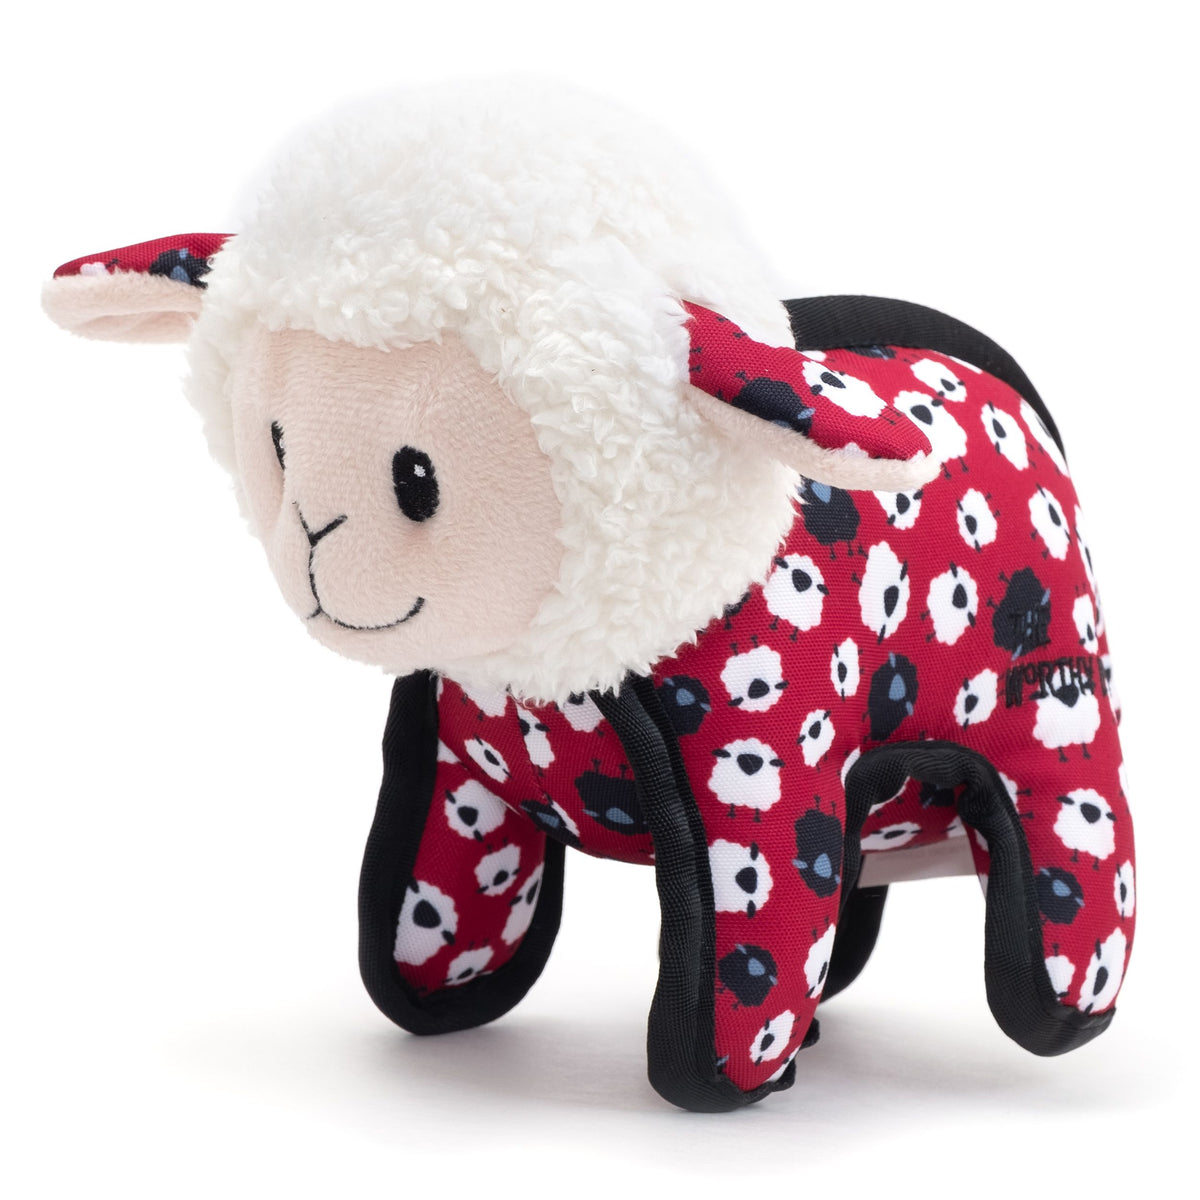 Counting Sheep Heavy Duty Toy - 3 Red Rovers